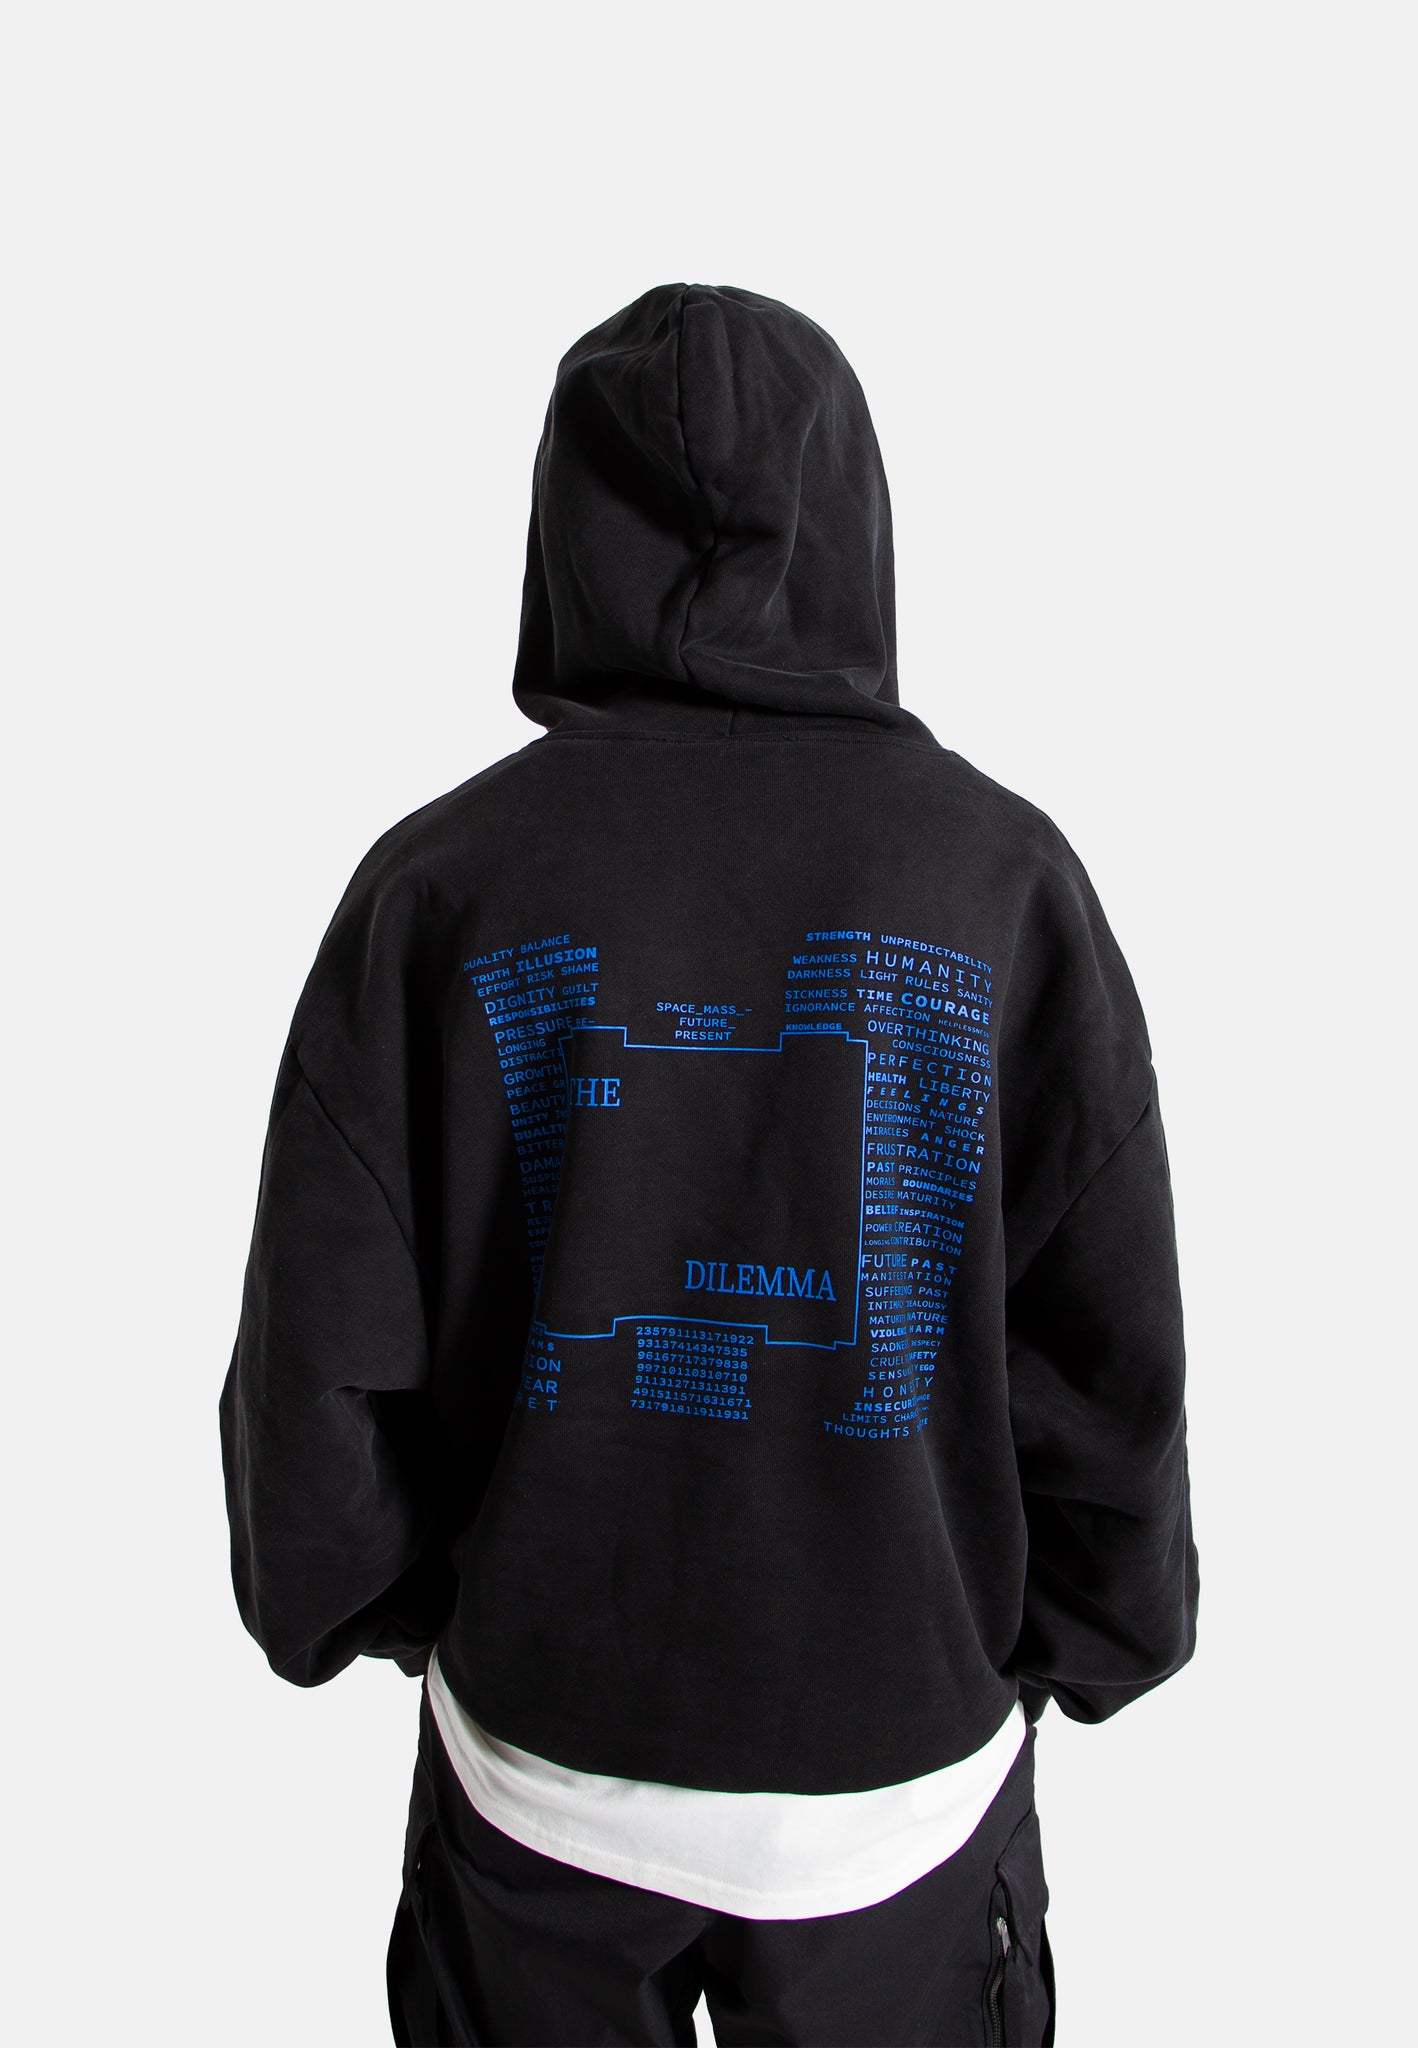 Oversized fit Dilemma Print Hoodie back view media